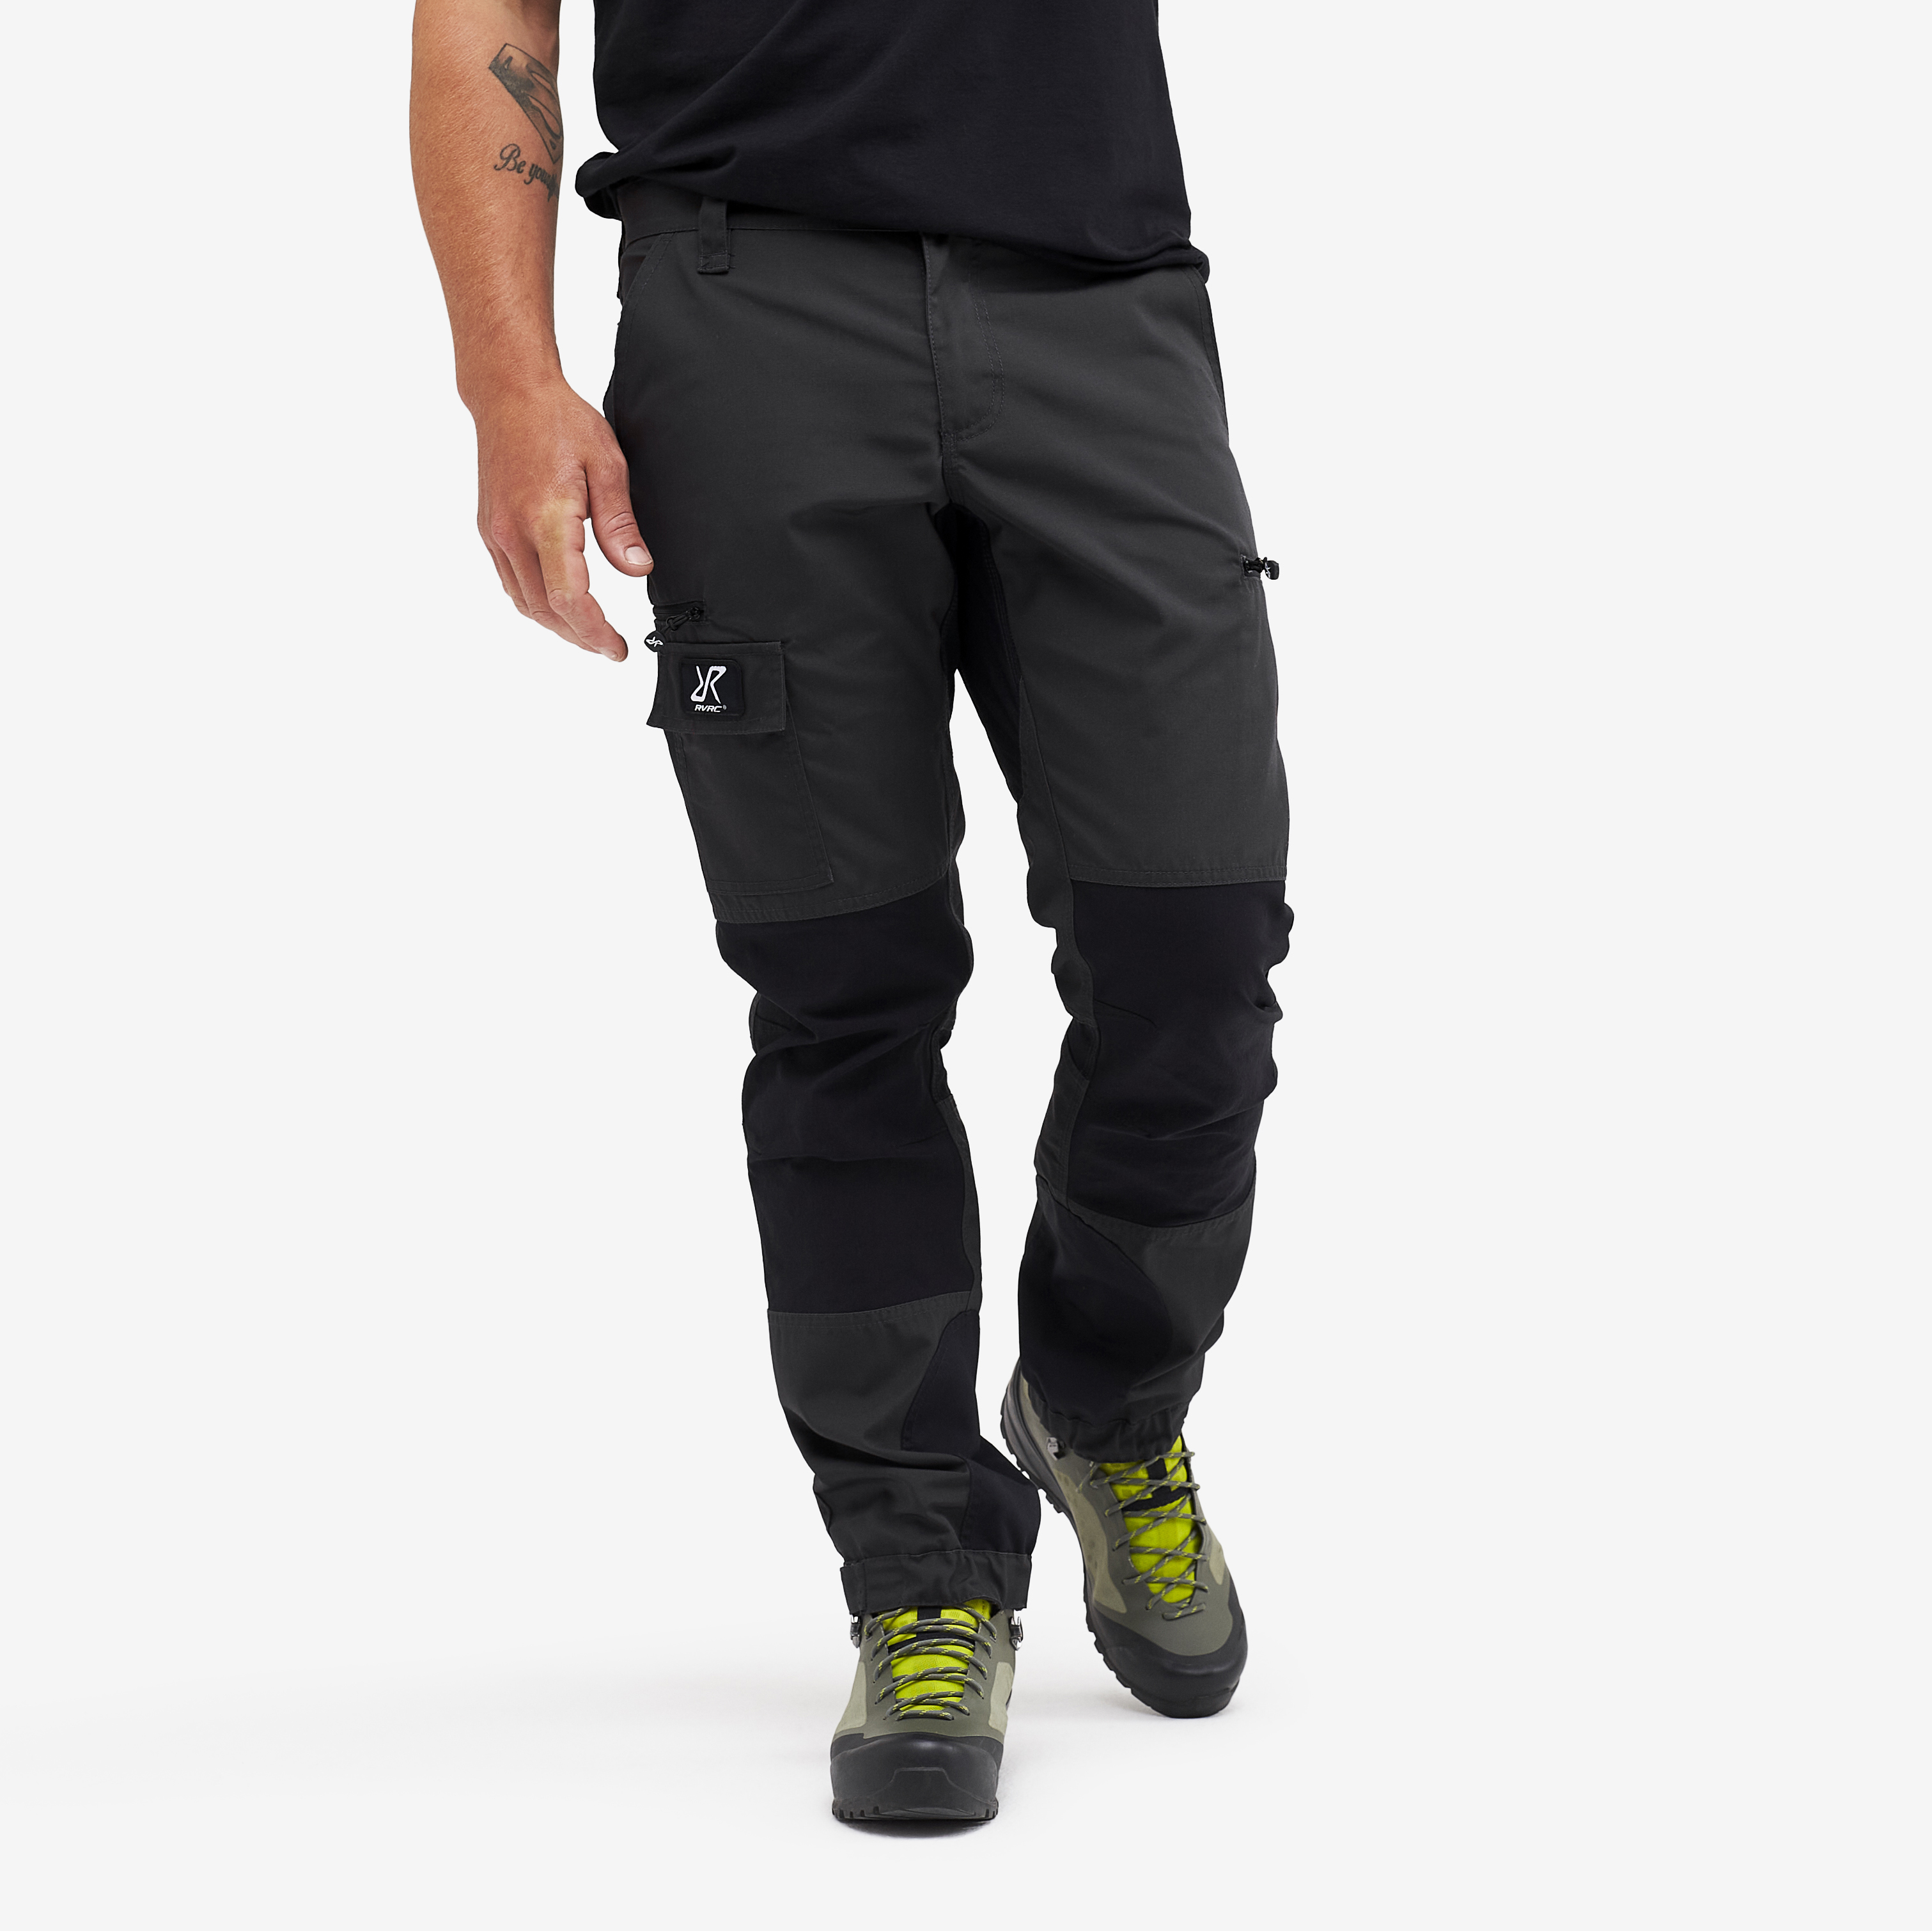 Nordwand Short Pants Anthracite Homme